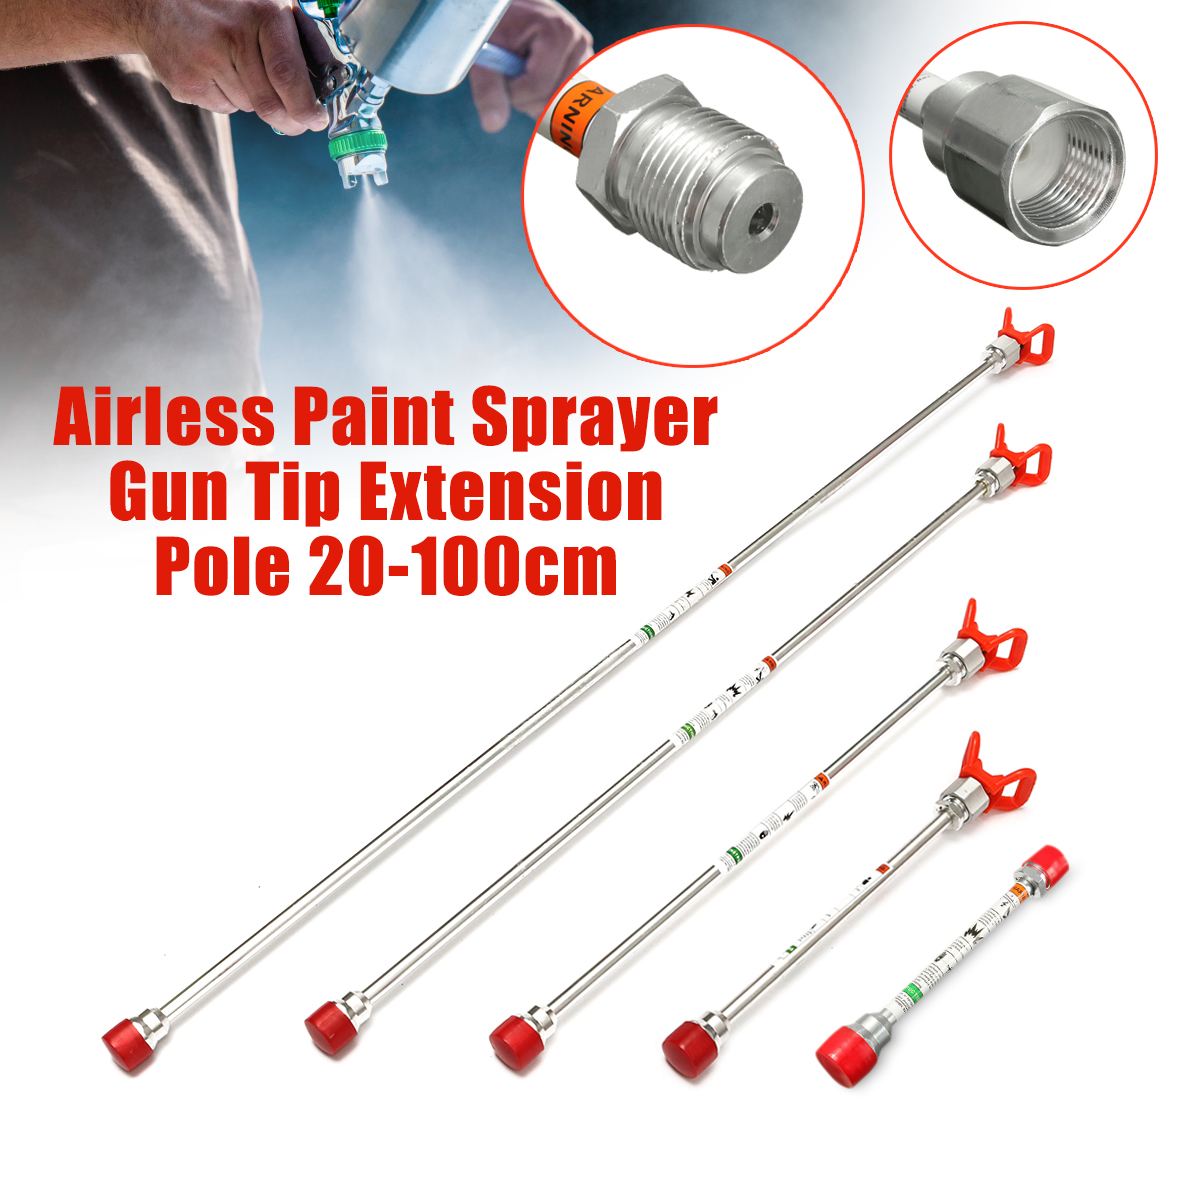 305075100cm-Airless-Paint-Sprayer-Tip-Extension-Pole-for-Airless-Sprayer-1432707-1